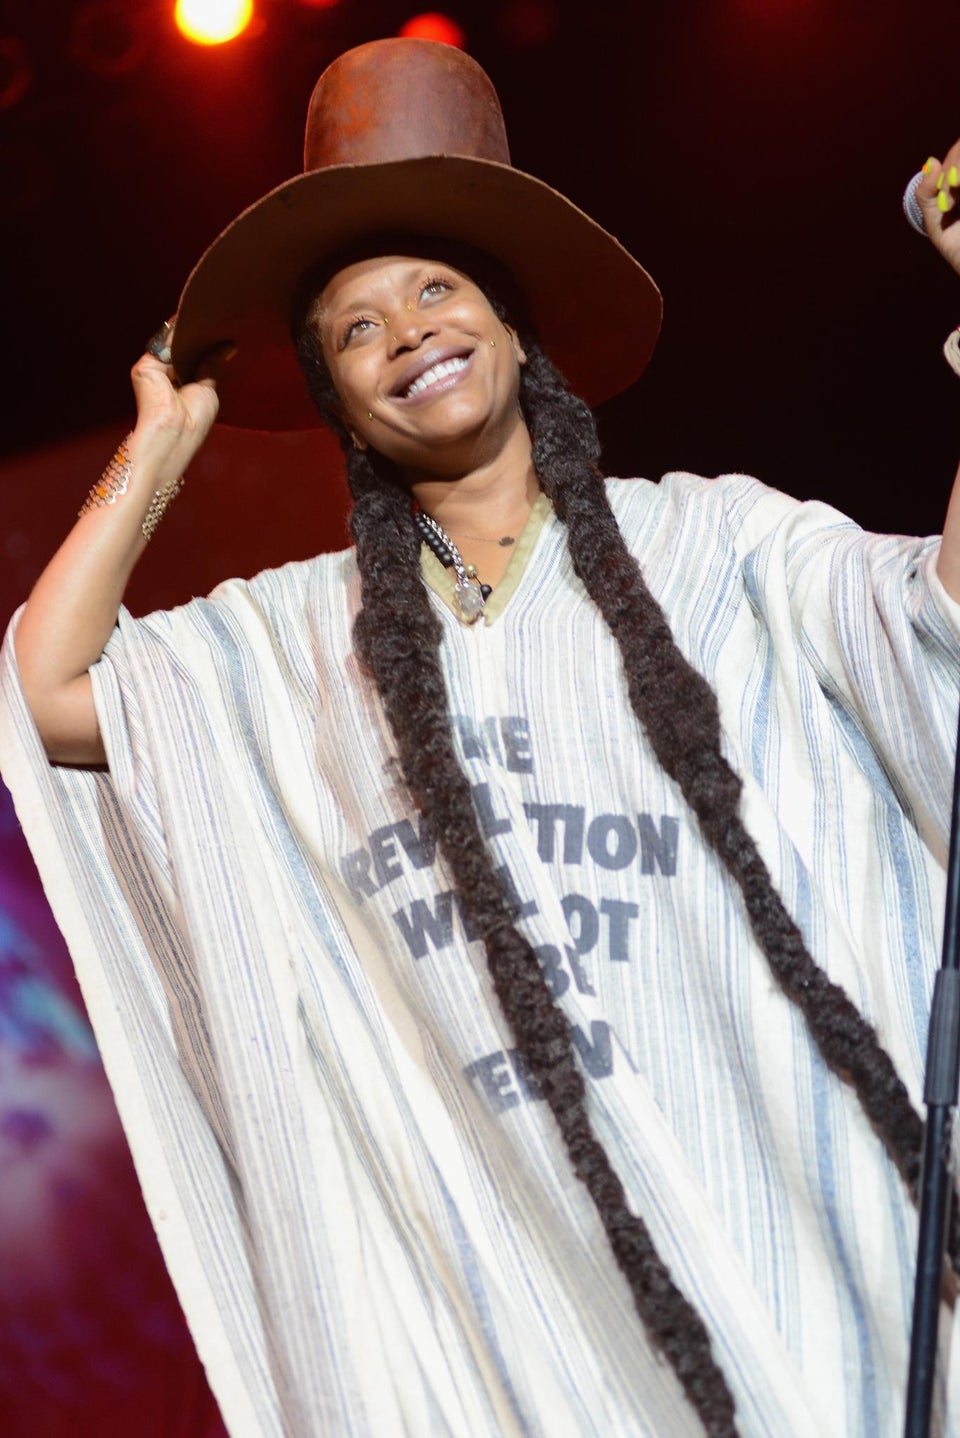 This video of Erykah Badu dancing in a bikini, celebrating her curves and “cuff season” is everything.